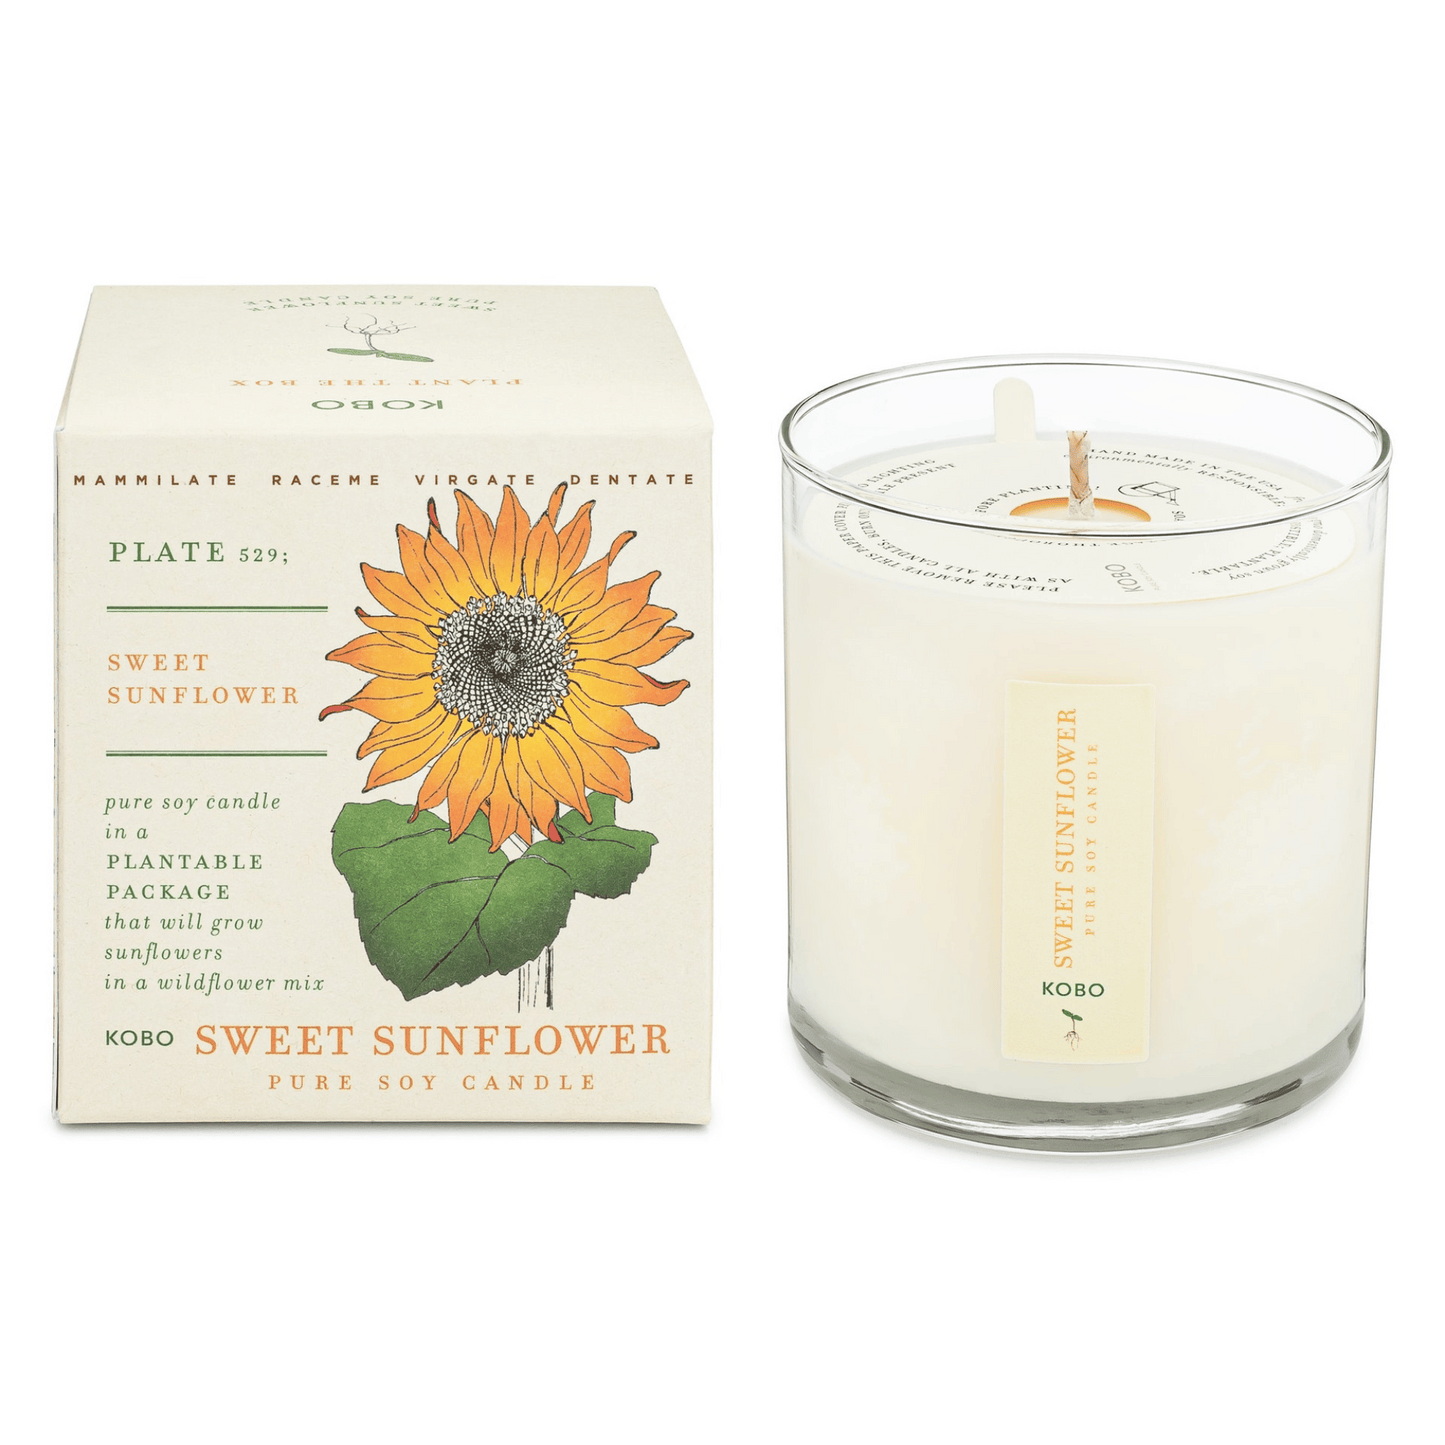 Primary Image of Sweet Sunflower Plant the Box Candle